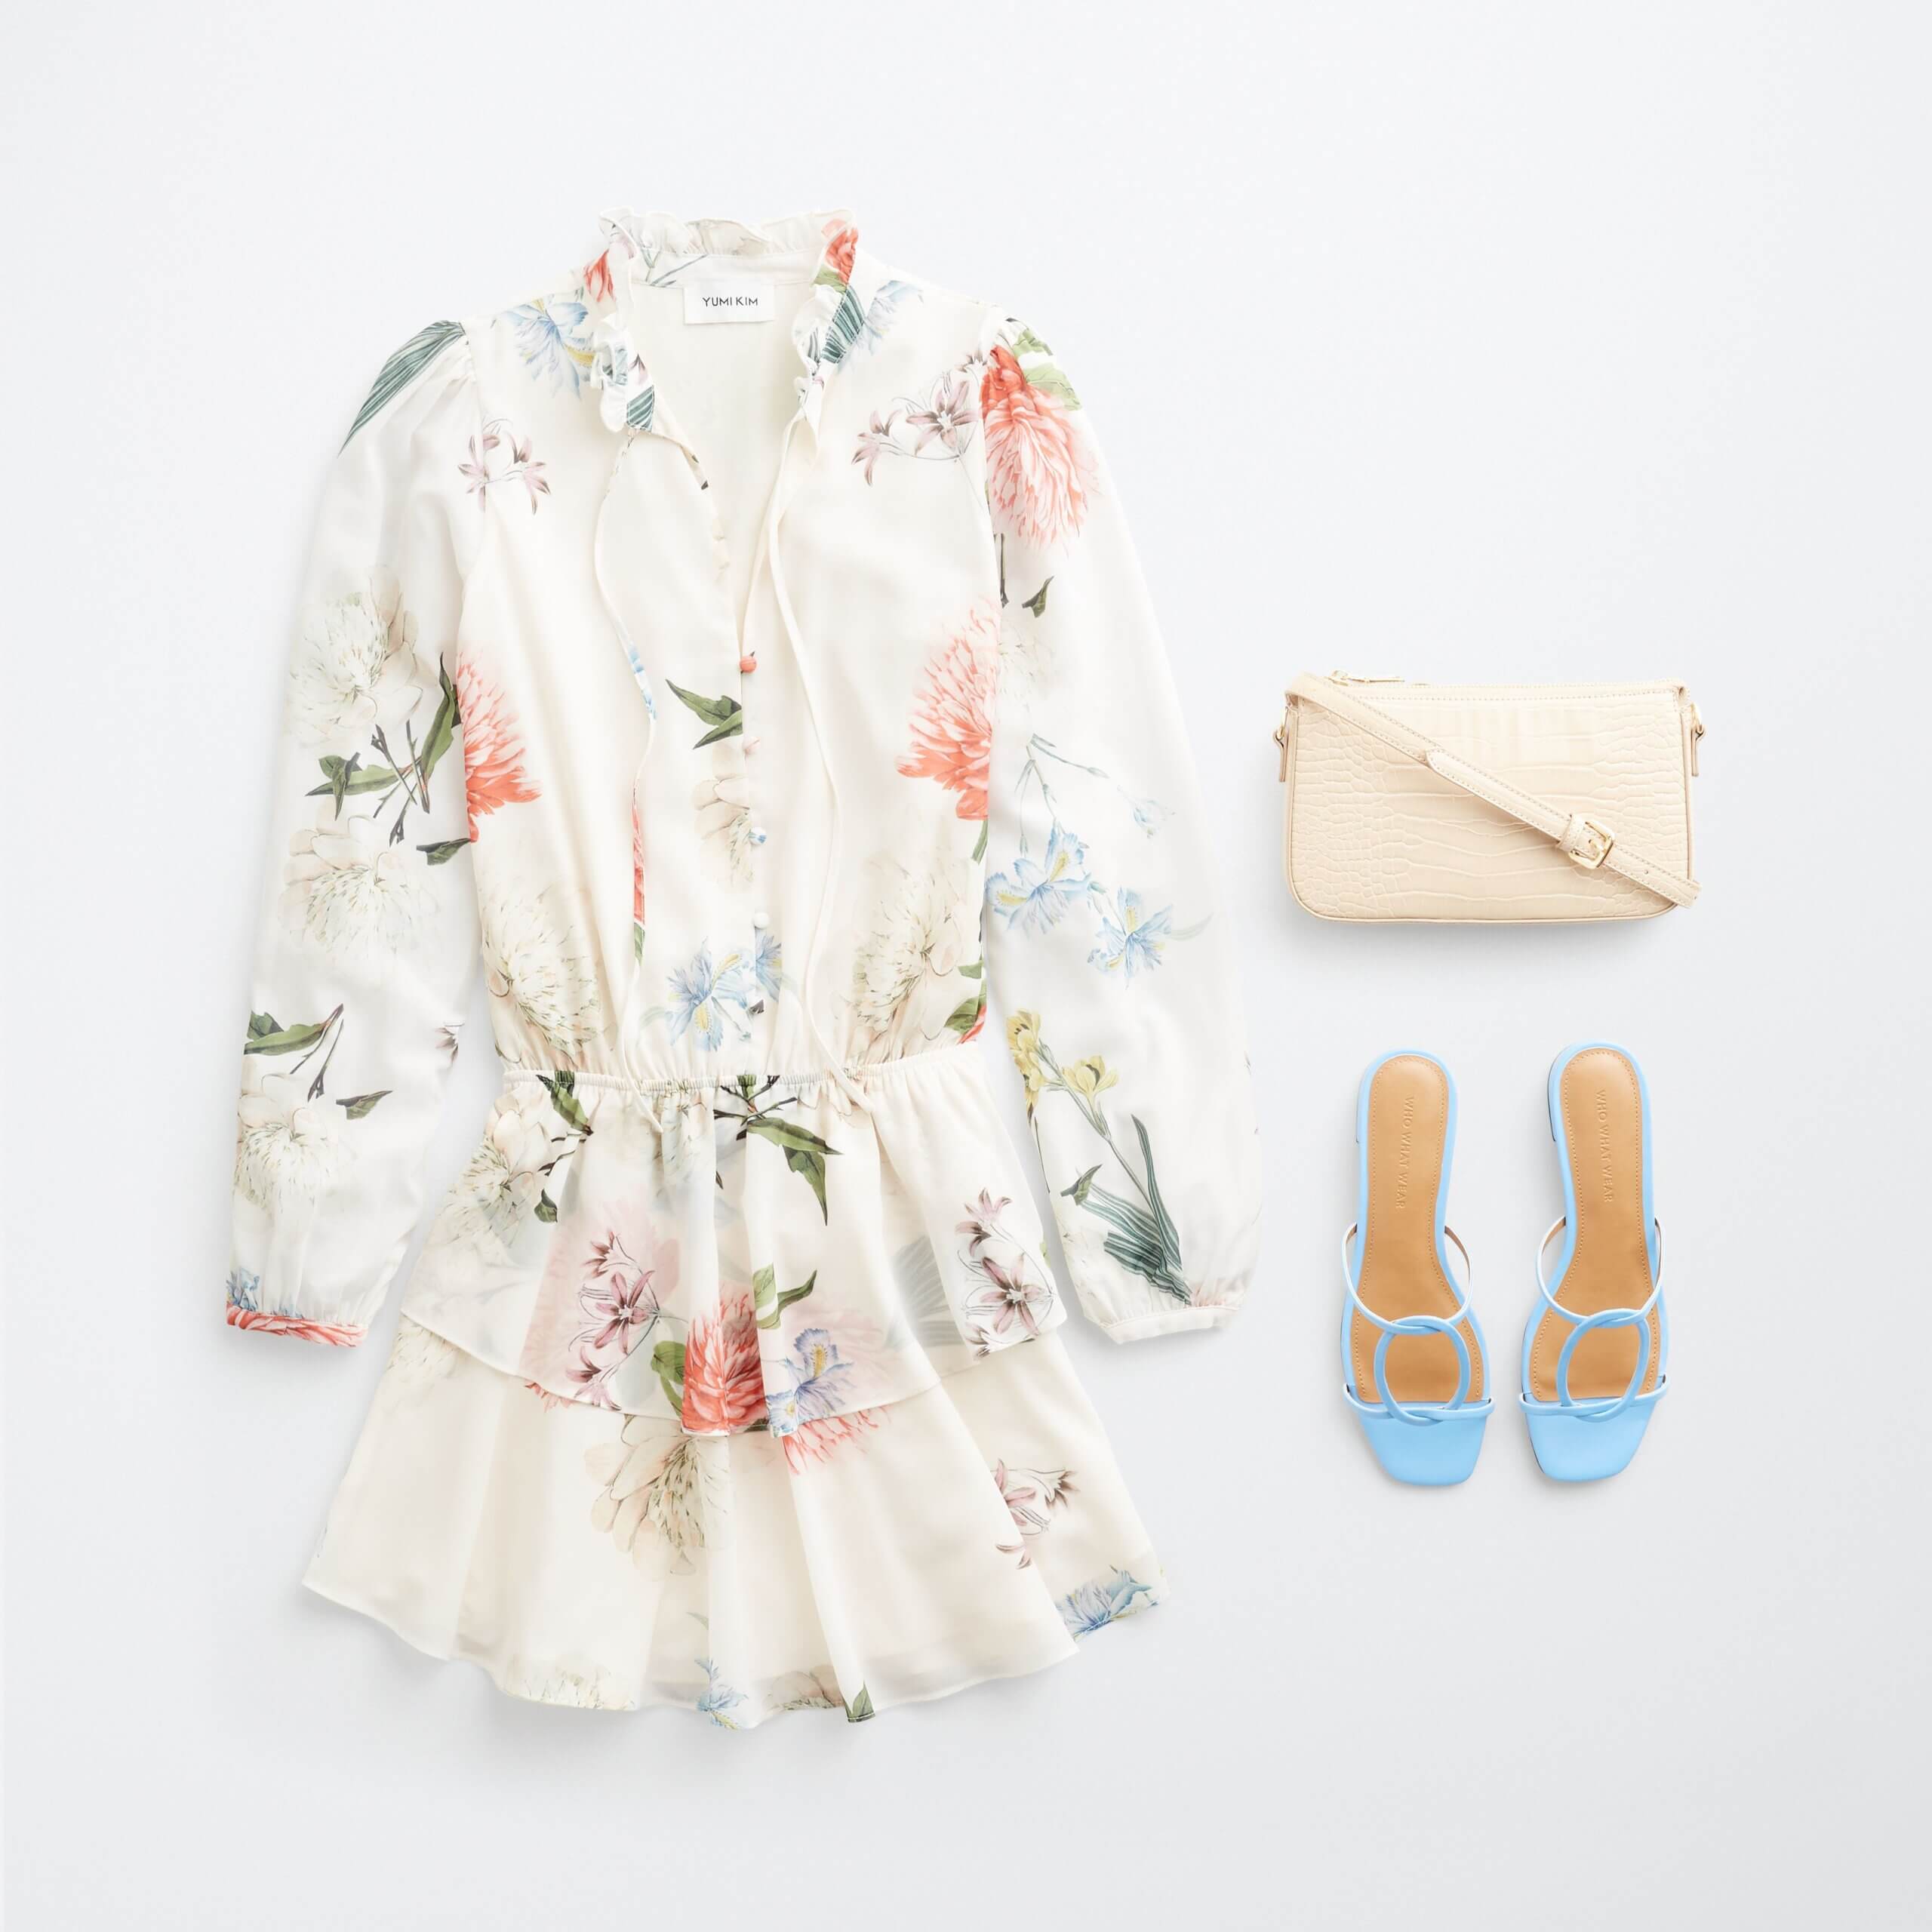 Stitch Fix women's outfit laydown featuring white floral romper, blue slide heeled sandals and cream crossbody bag.